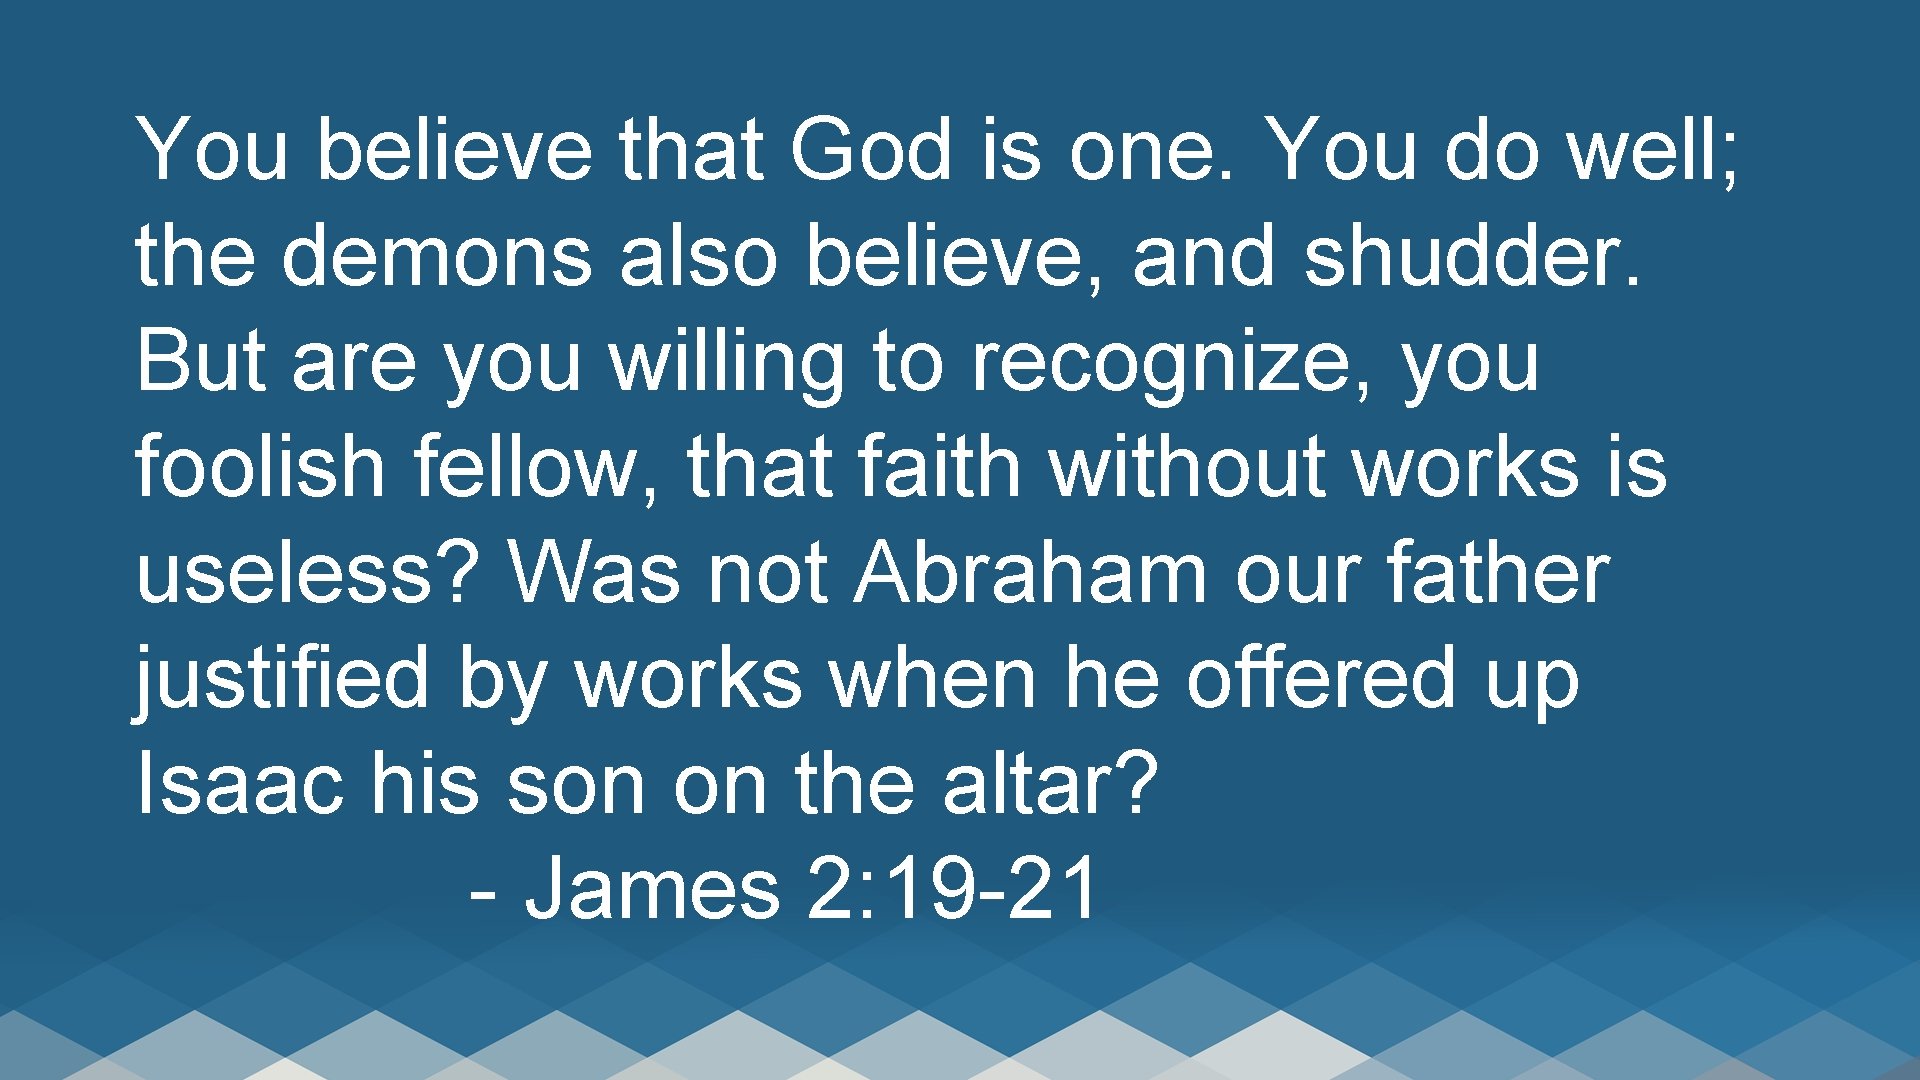 You believe that God is one. You do well; the demons also believe, and